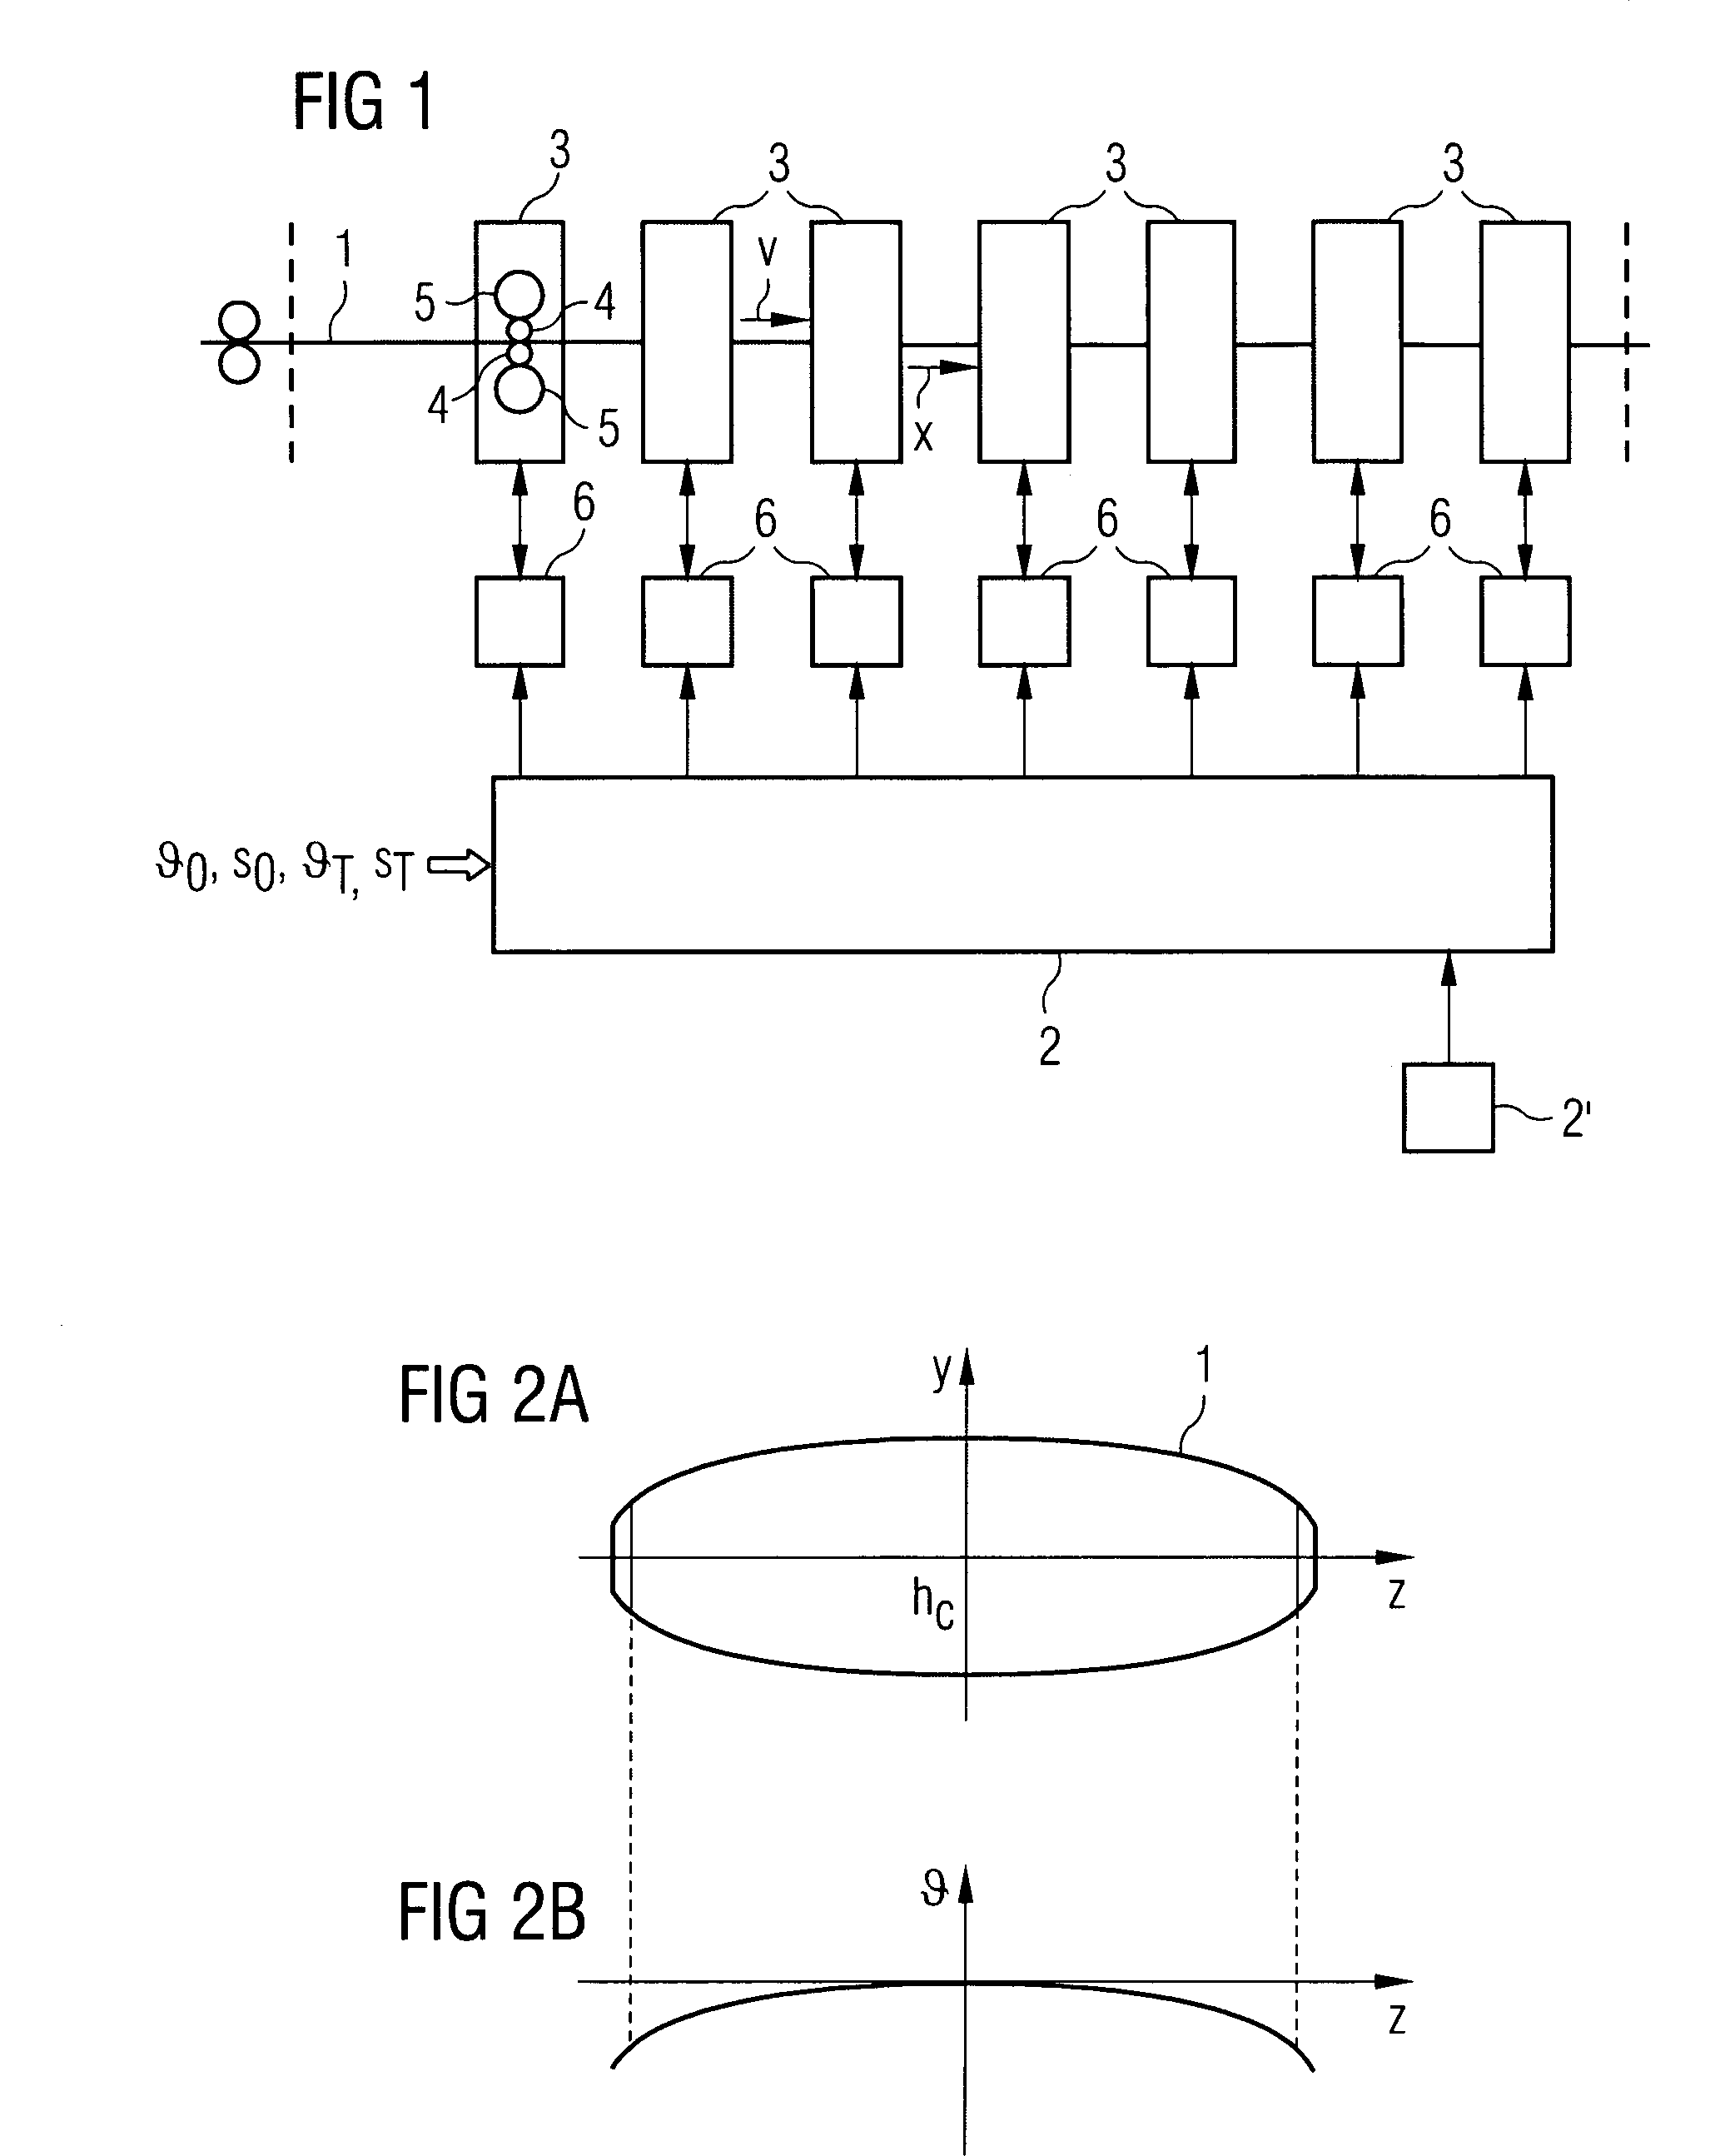 Computer-aided method for determining desired values for controlling elements of profile and surface evenness